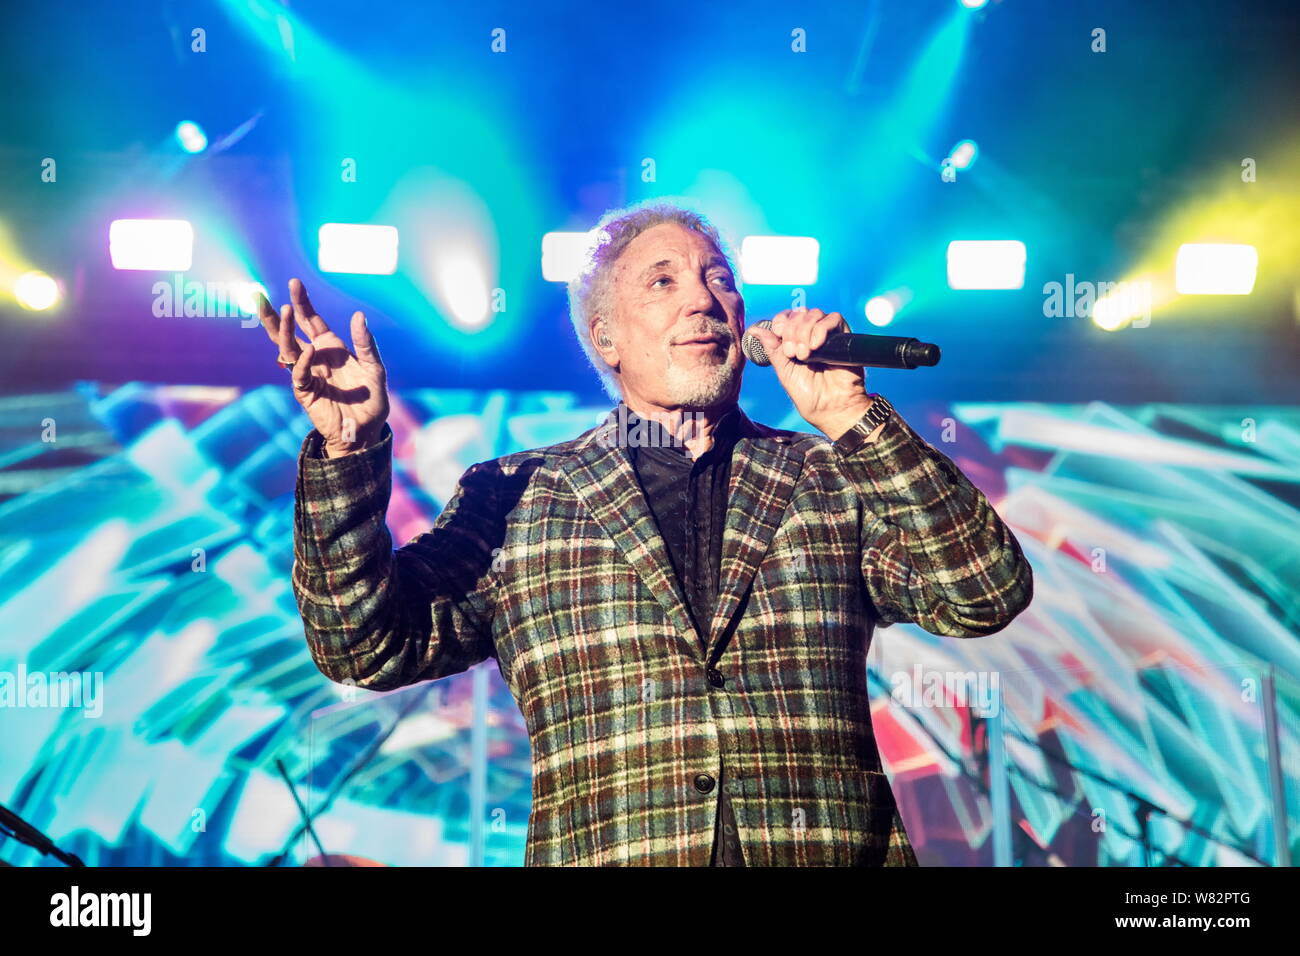 Welsh singer Sir Thomas John Woodward, known by his stage name Tom Jones, performs during a concert in Hong Kong, China, 25 February 2017. Stock Photo